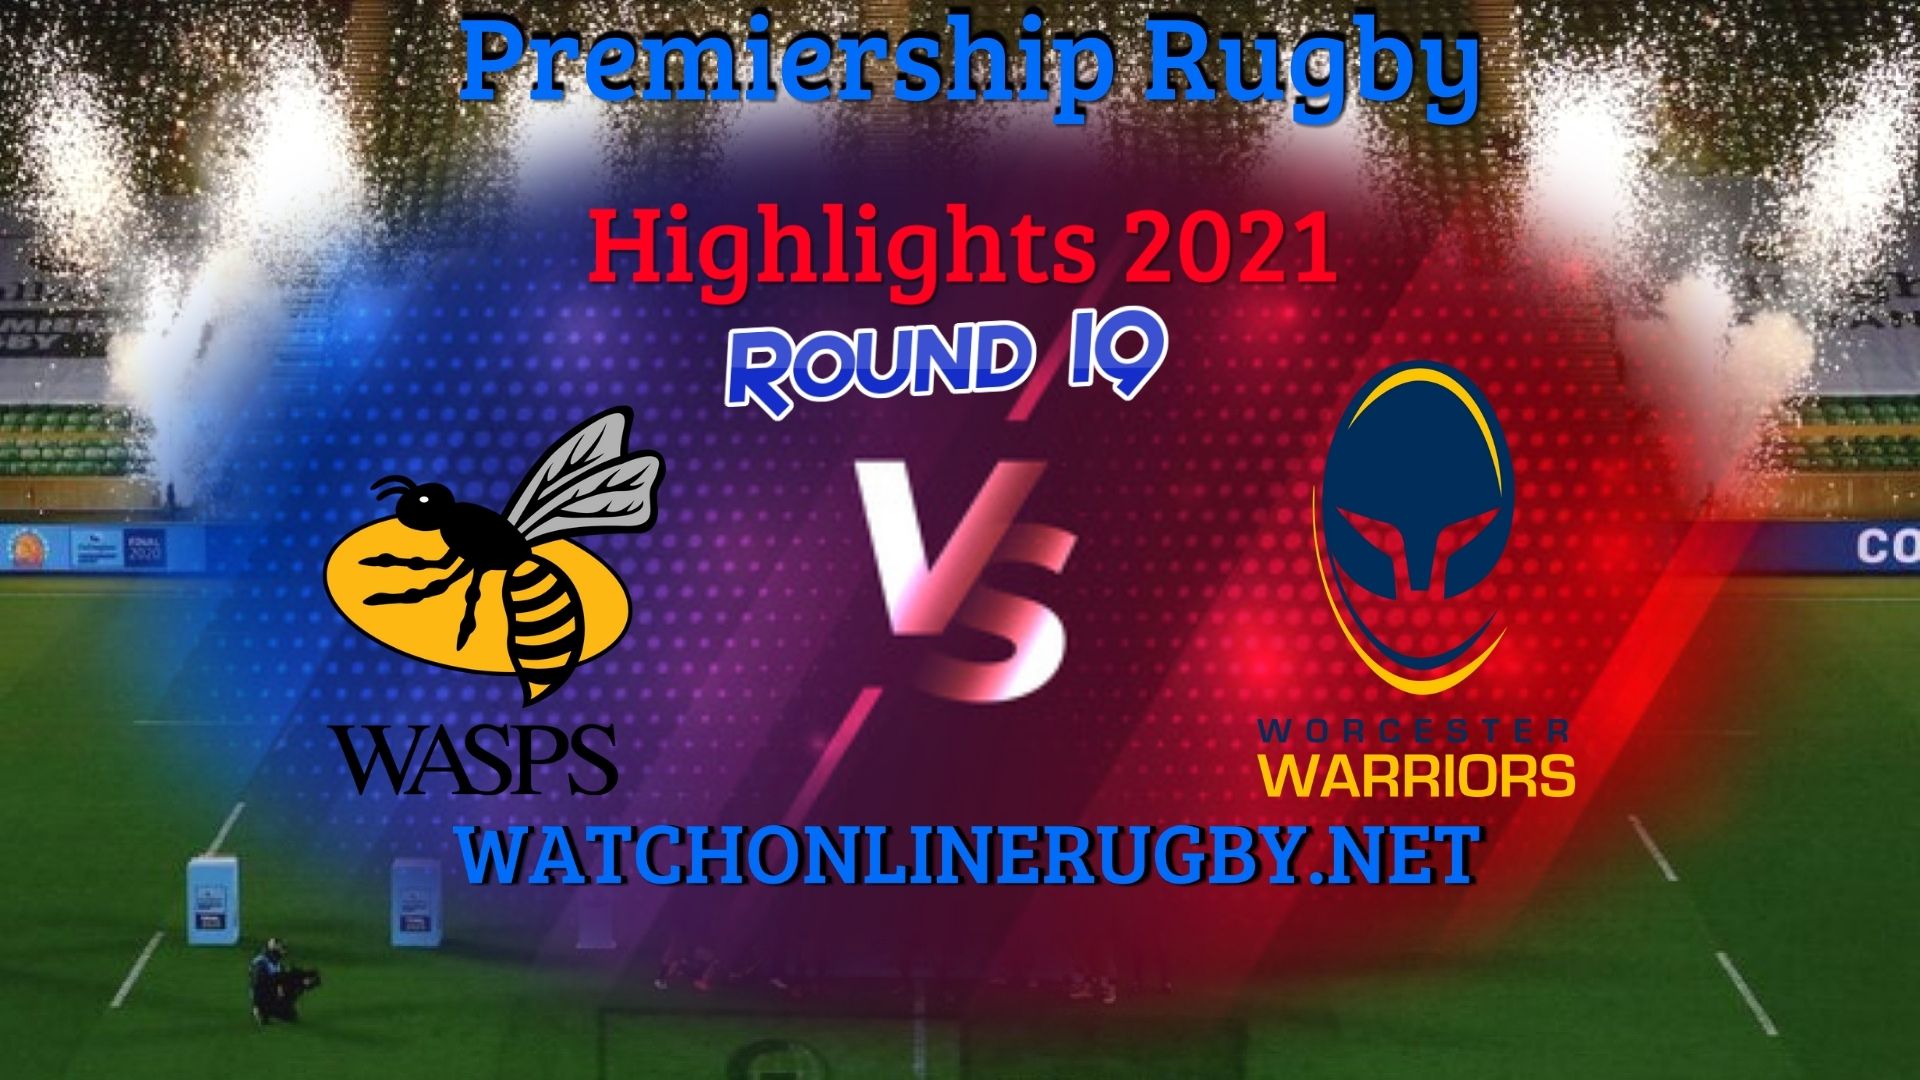 Wasps Vs Worcester Warriors Premiership Rugby 2021 RD 19